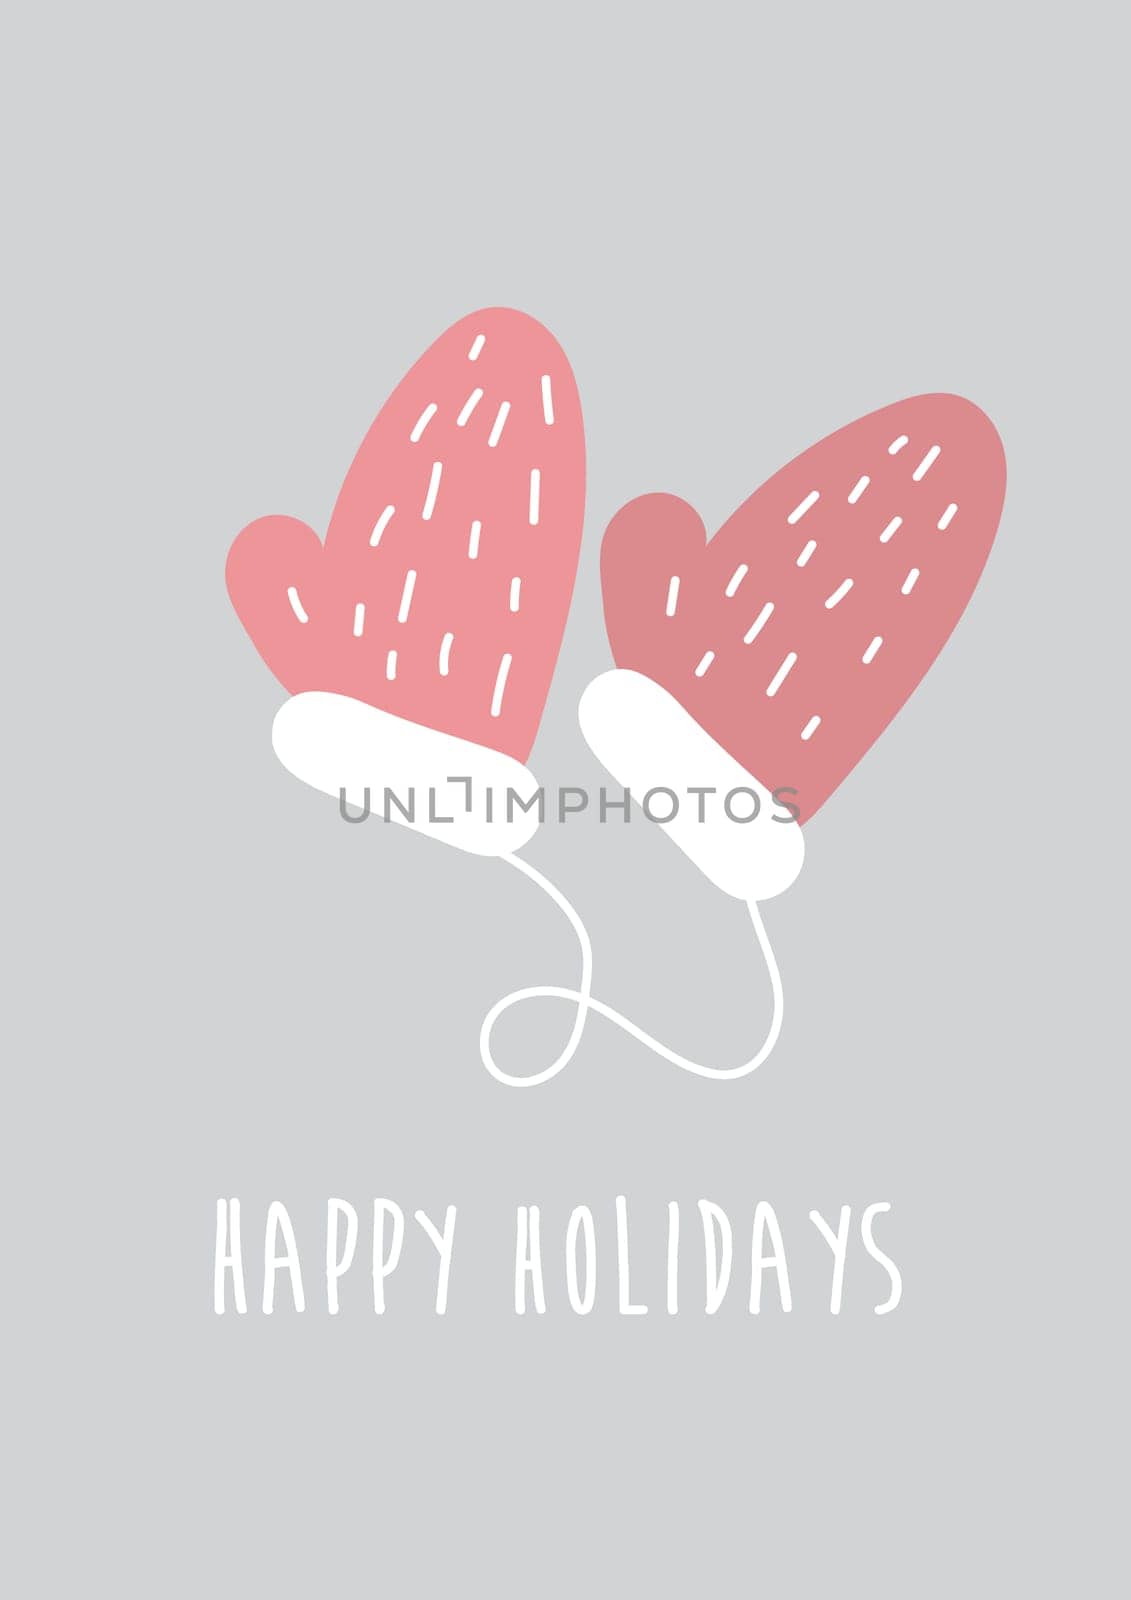 Pink mittens on grey background. Hand drawn vector illustration. Minimalist Scandinavian design. Holiday card template with happy holidays text